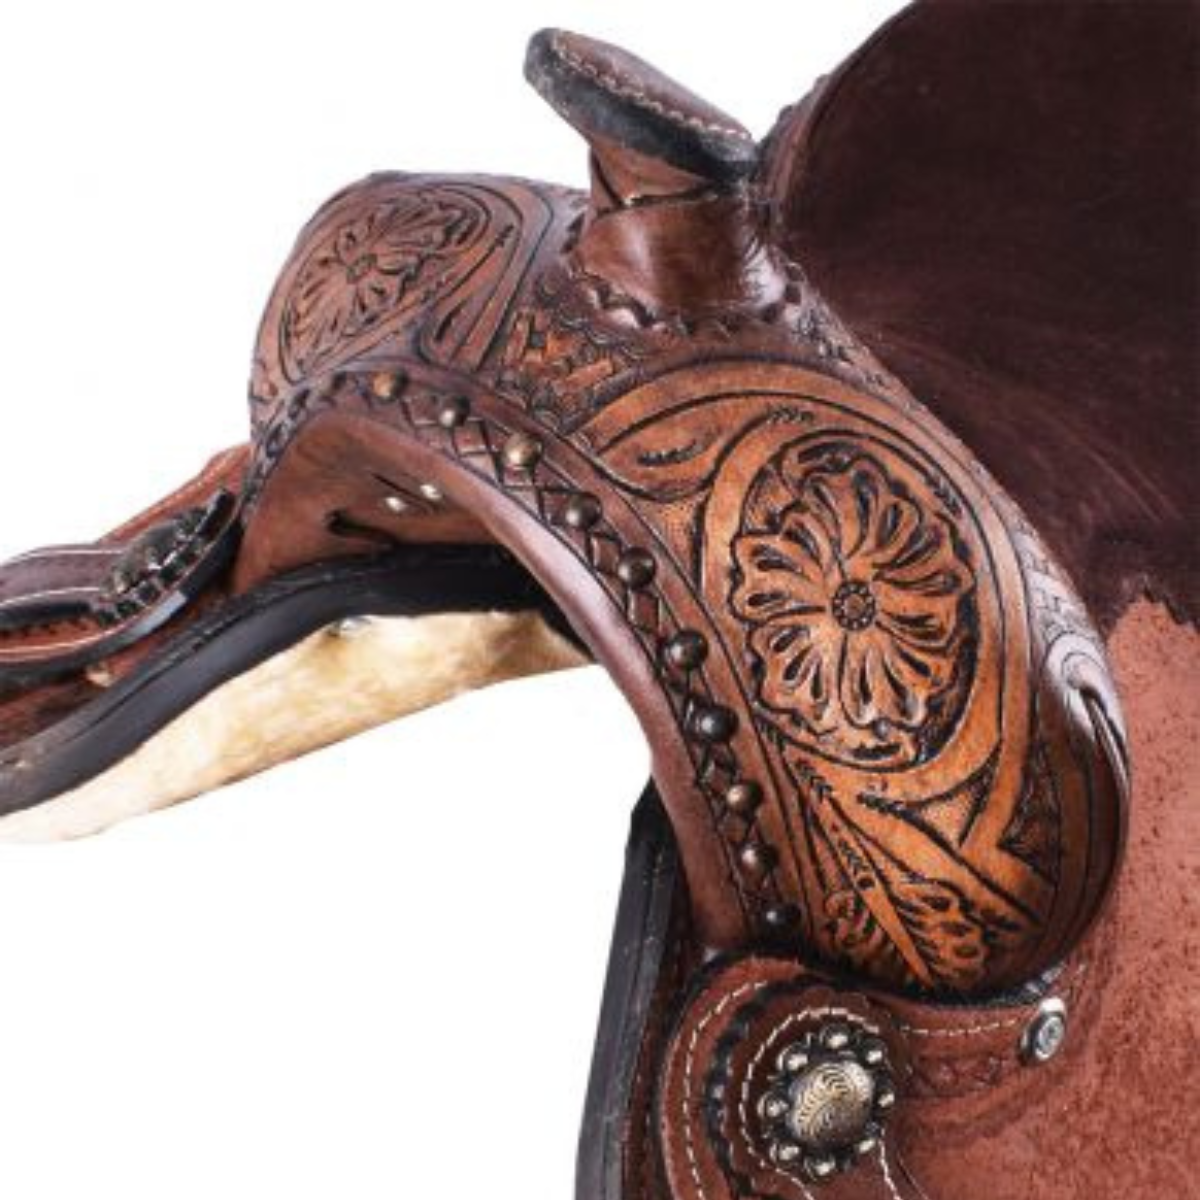 10" DOUBLE T PONY SADDLE WITH FLORAL TOOLING - Double T Saddles